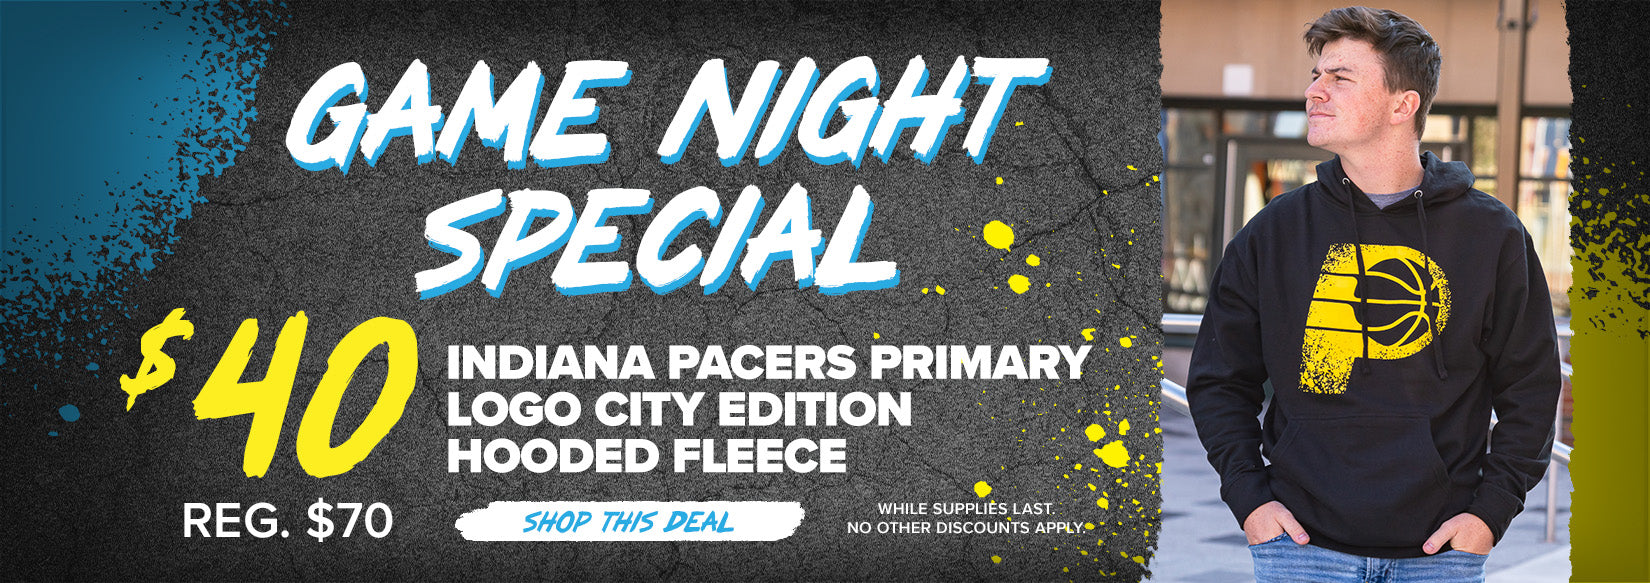 Game Night Special - Indiana Pacers Primary Logo City Edition Hooded Fleece - SHOP THIS DEAL